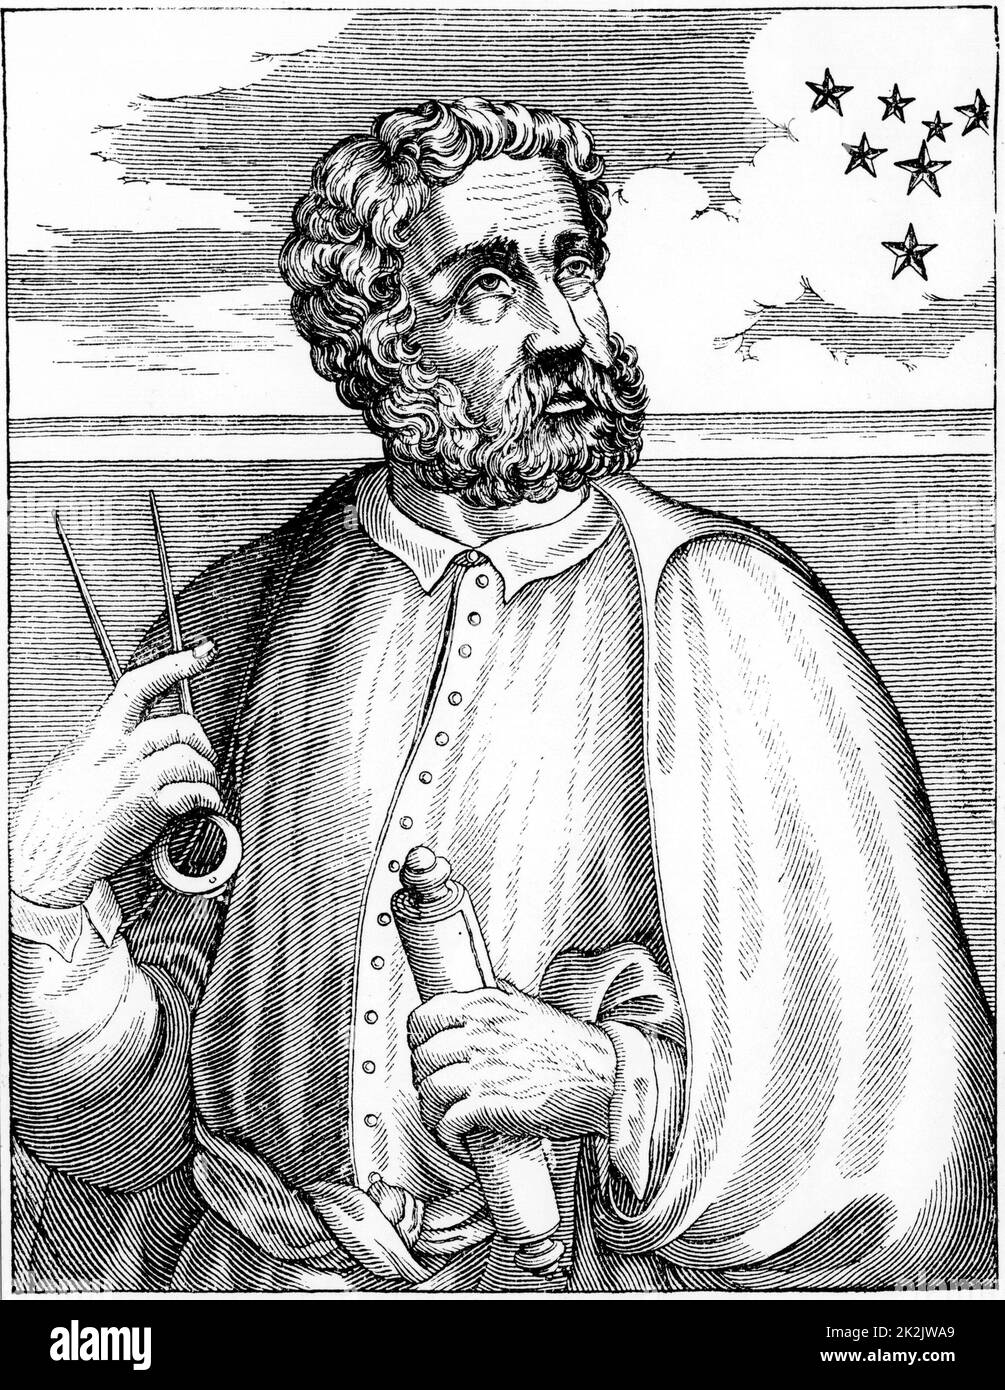 Ferdinand Magellan(c1480-1521) Portugese navigator. Led first expedition to cirumnavigate the globe. Rounded Magellan Strait from Atlantic to Pacific, October-November 1519. Woodcut Stock Photo